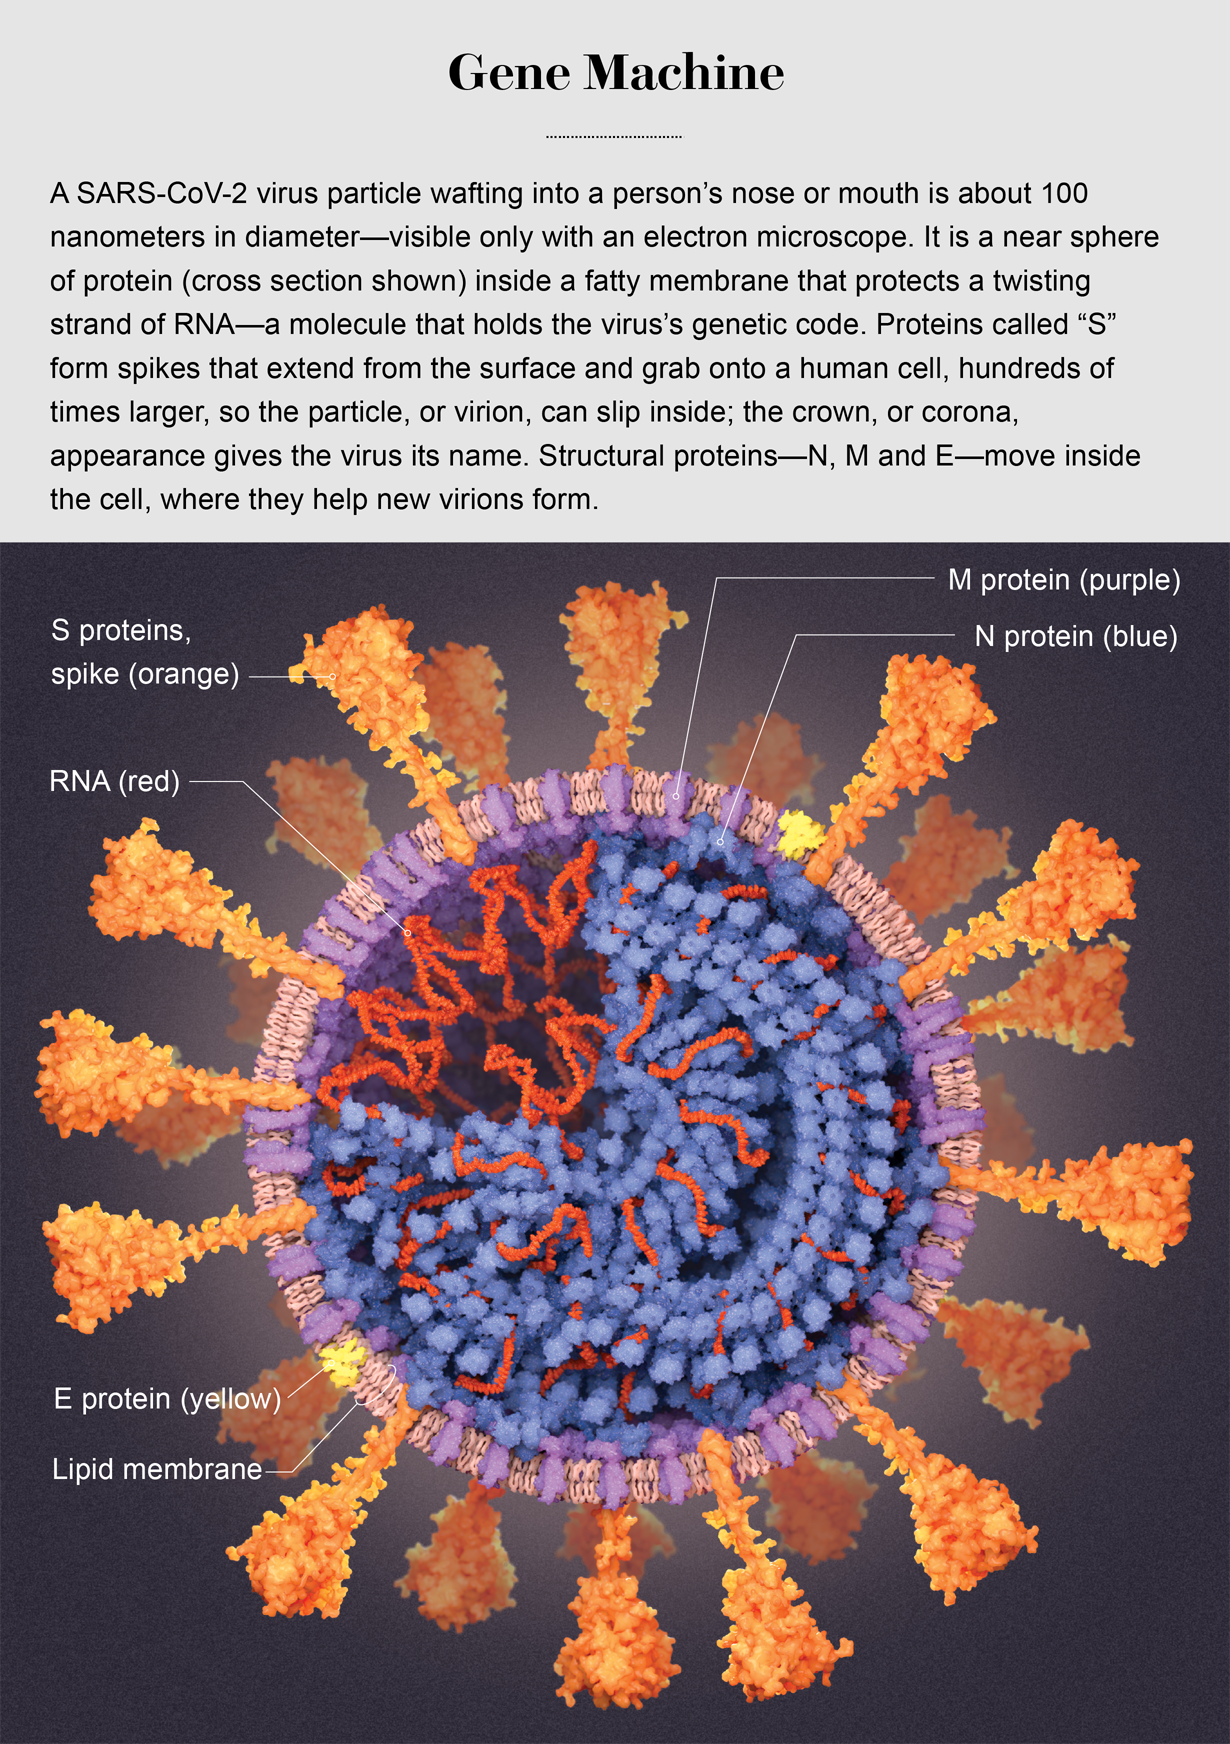 illustration of SARS-CoV2 virus particle highlights RNA lipid membrane and E M and S proteins